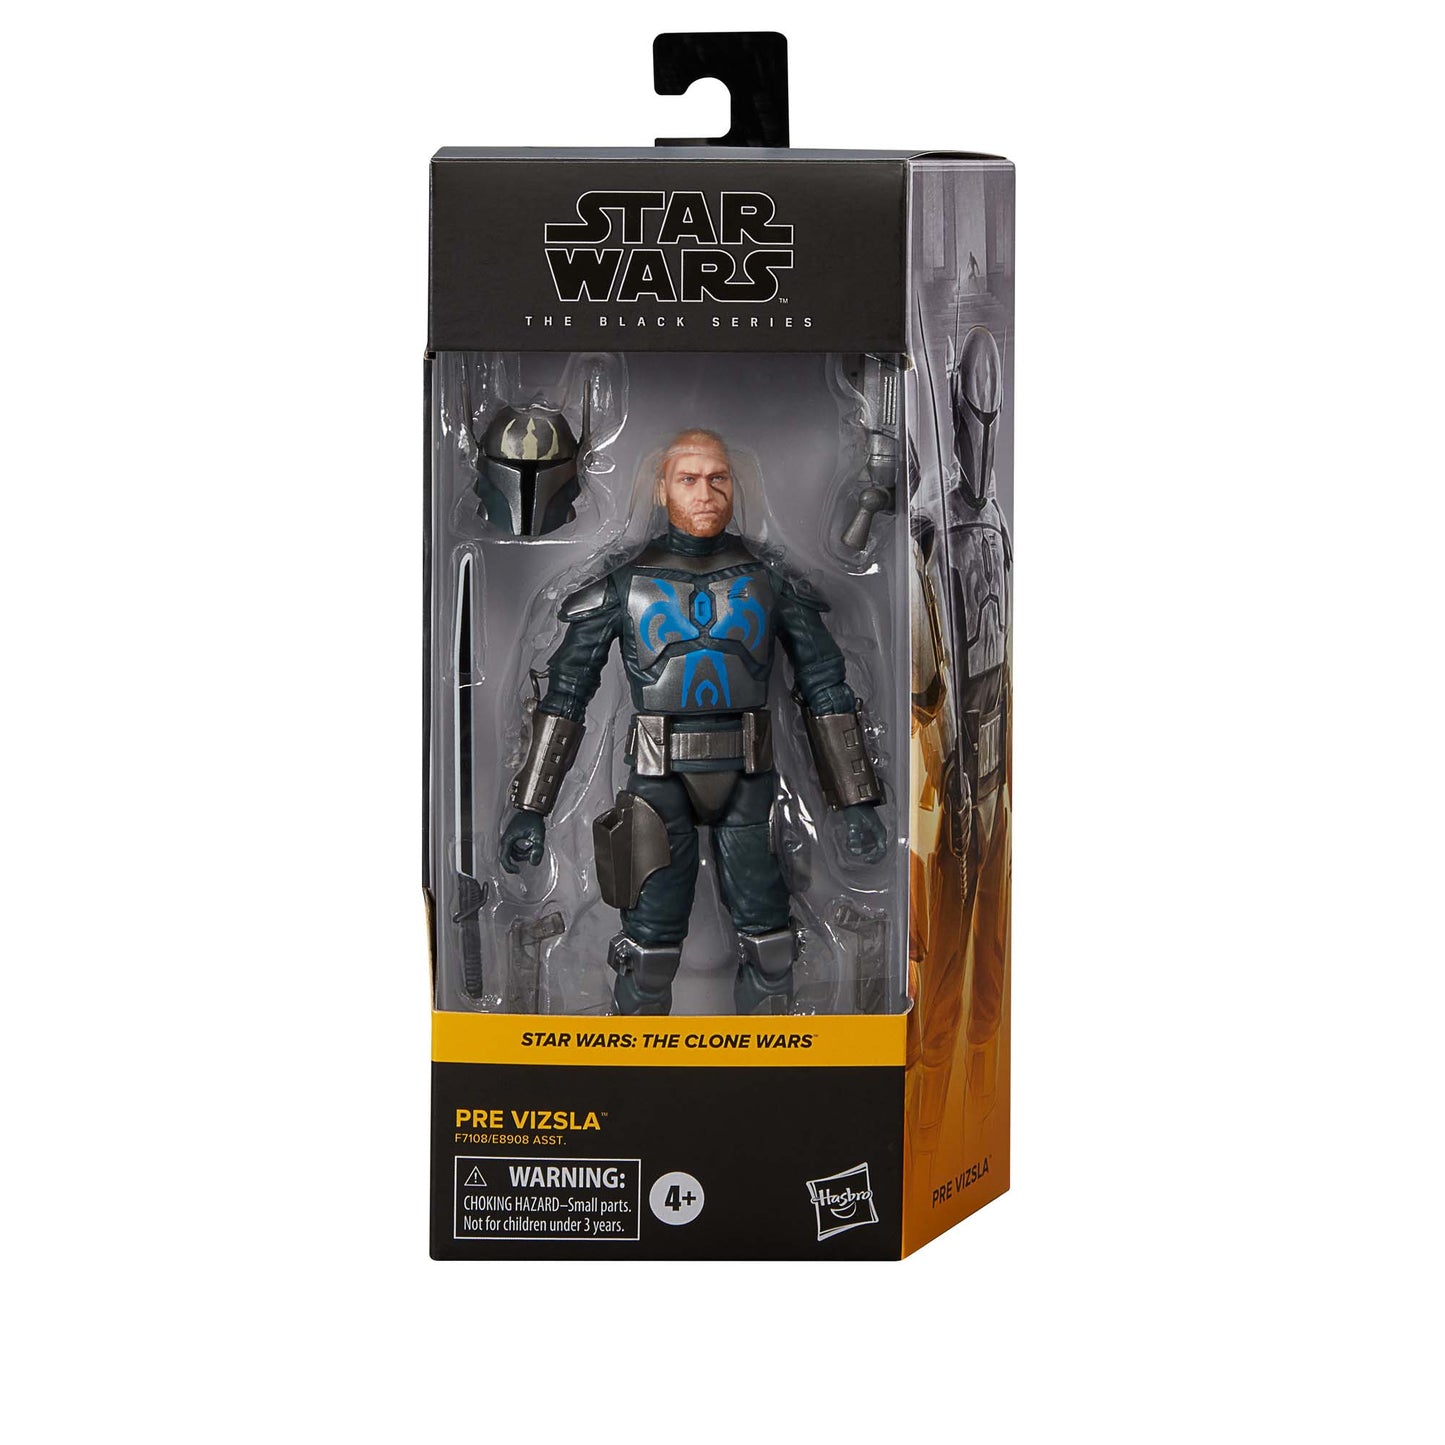 Star Wars The Black Series Pre Vizsla Action Figure Toy front package - Heretoserveyou